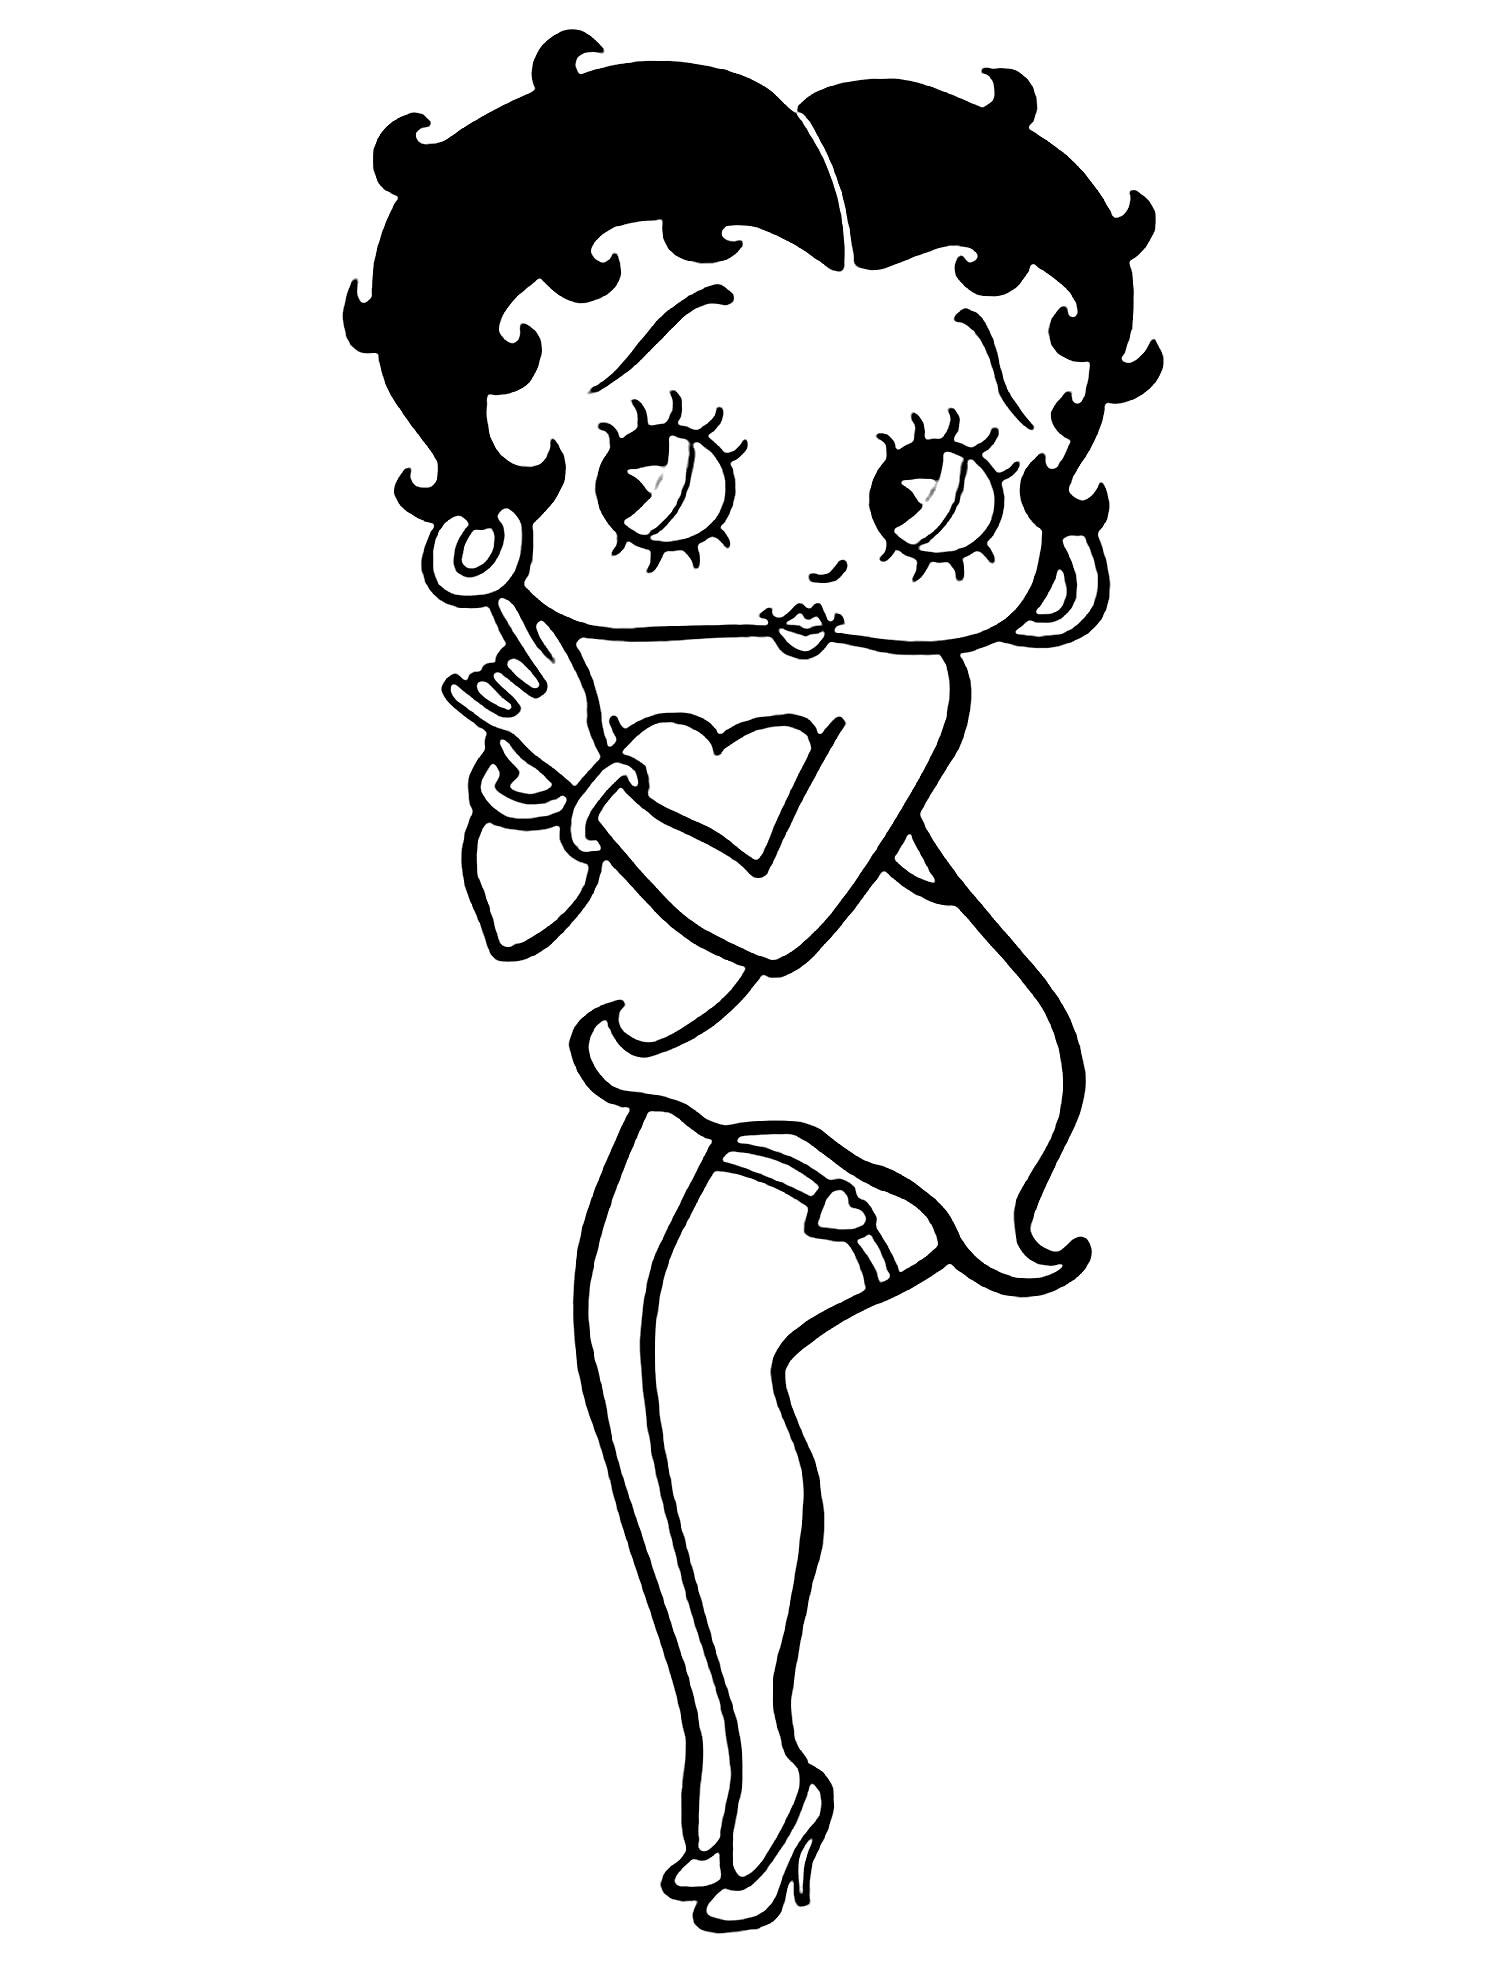 Download Betty boop free to color for children - Betty Boop Kids Coloring Pages